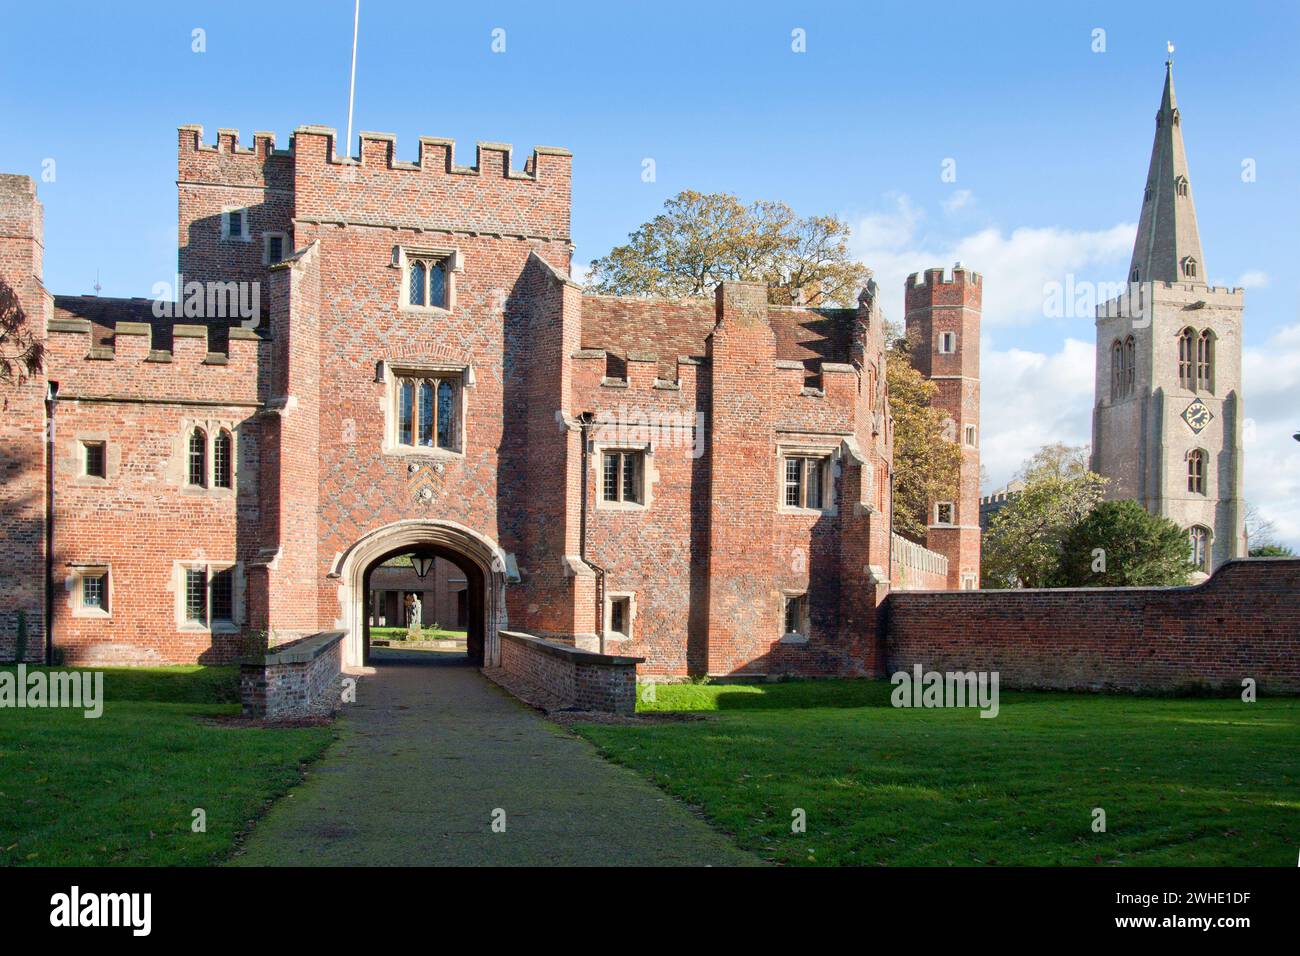 Buckden Towers, Bishops Palace & St Mary's Church, Buckden, St Neots, Cambridgeshire, England Stockfoto